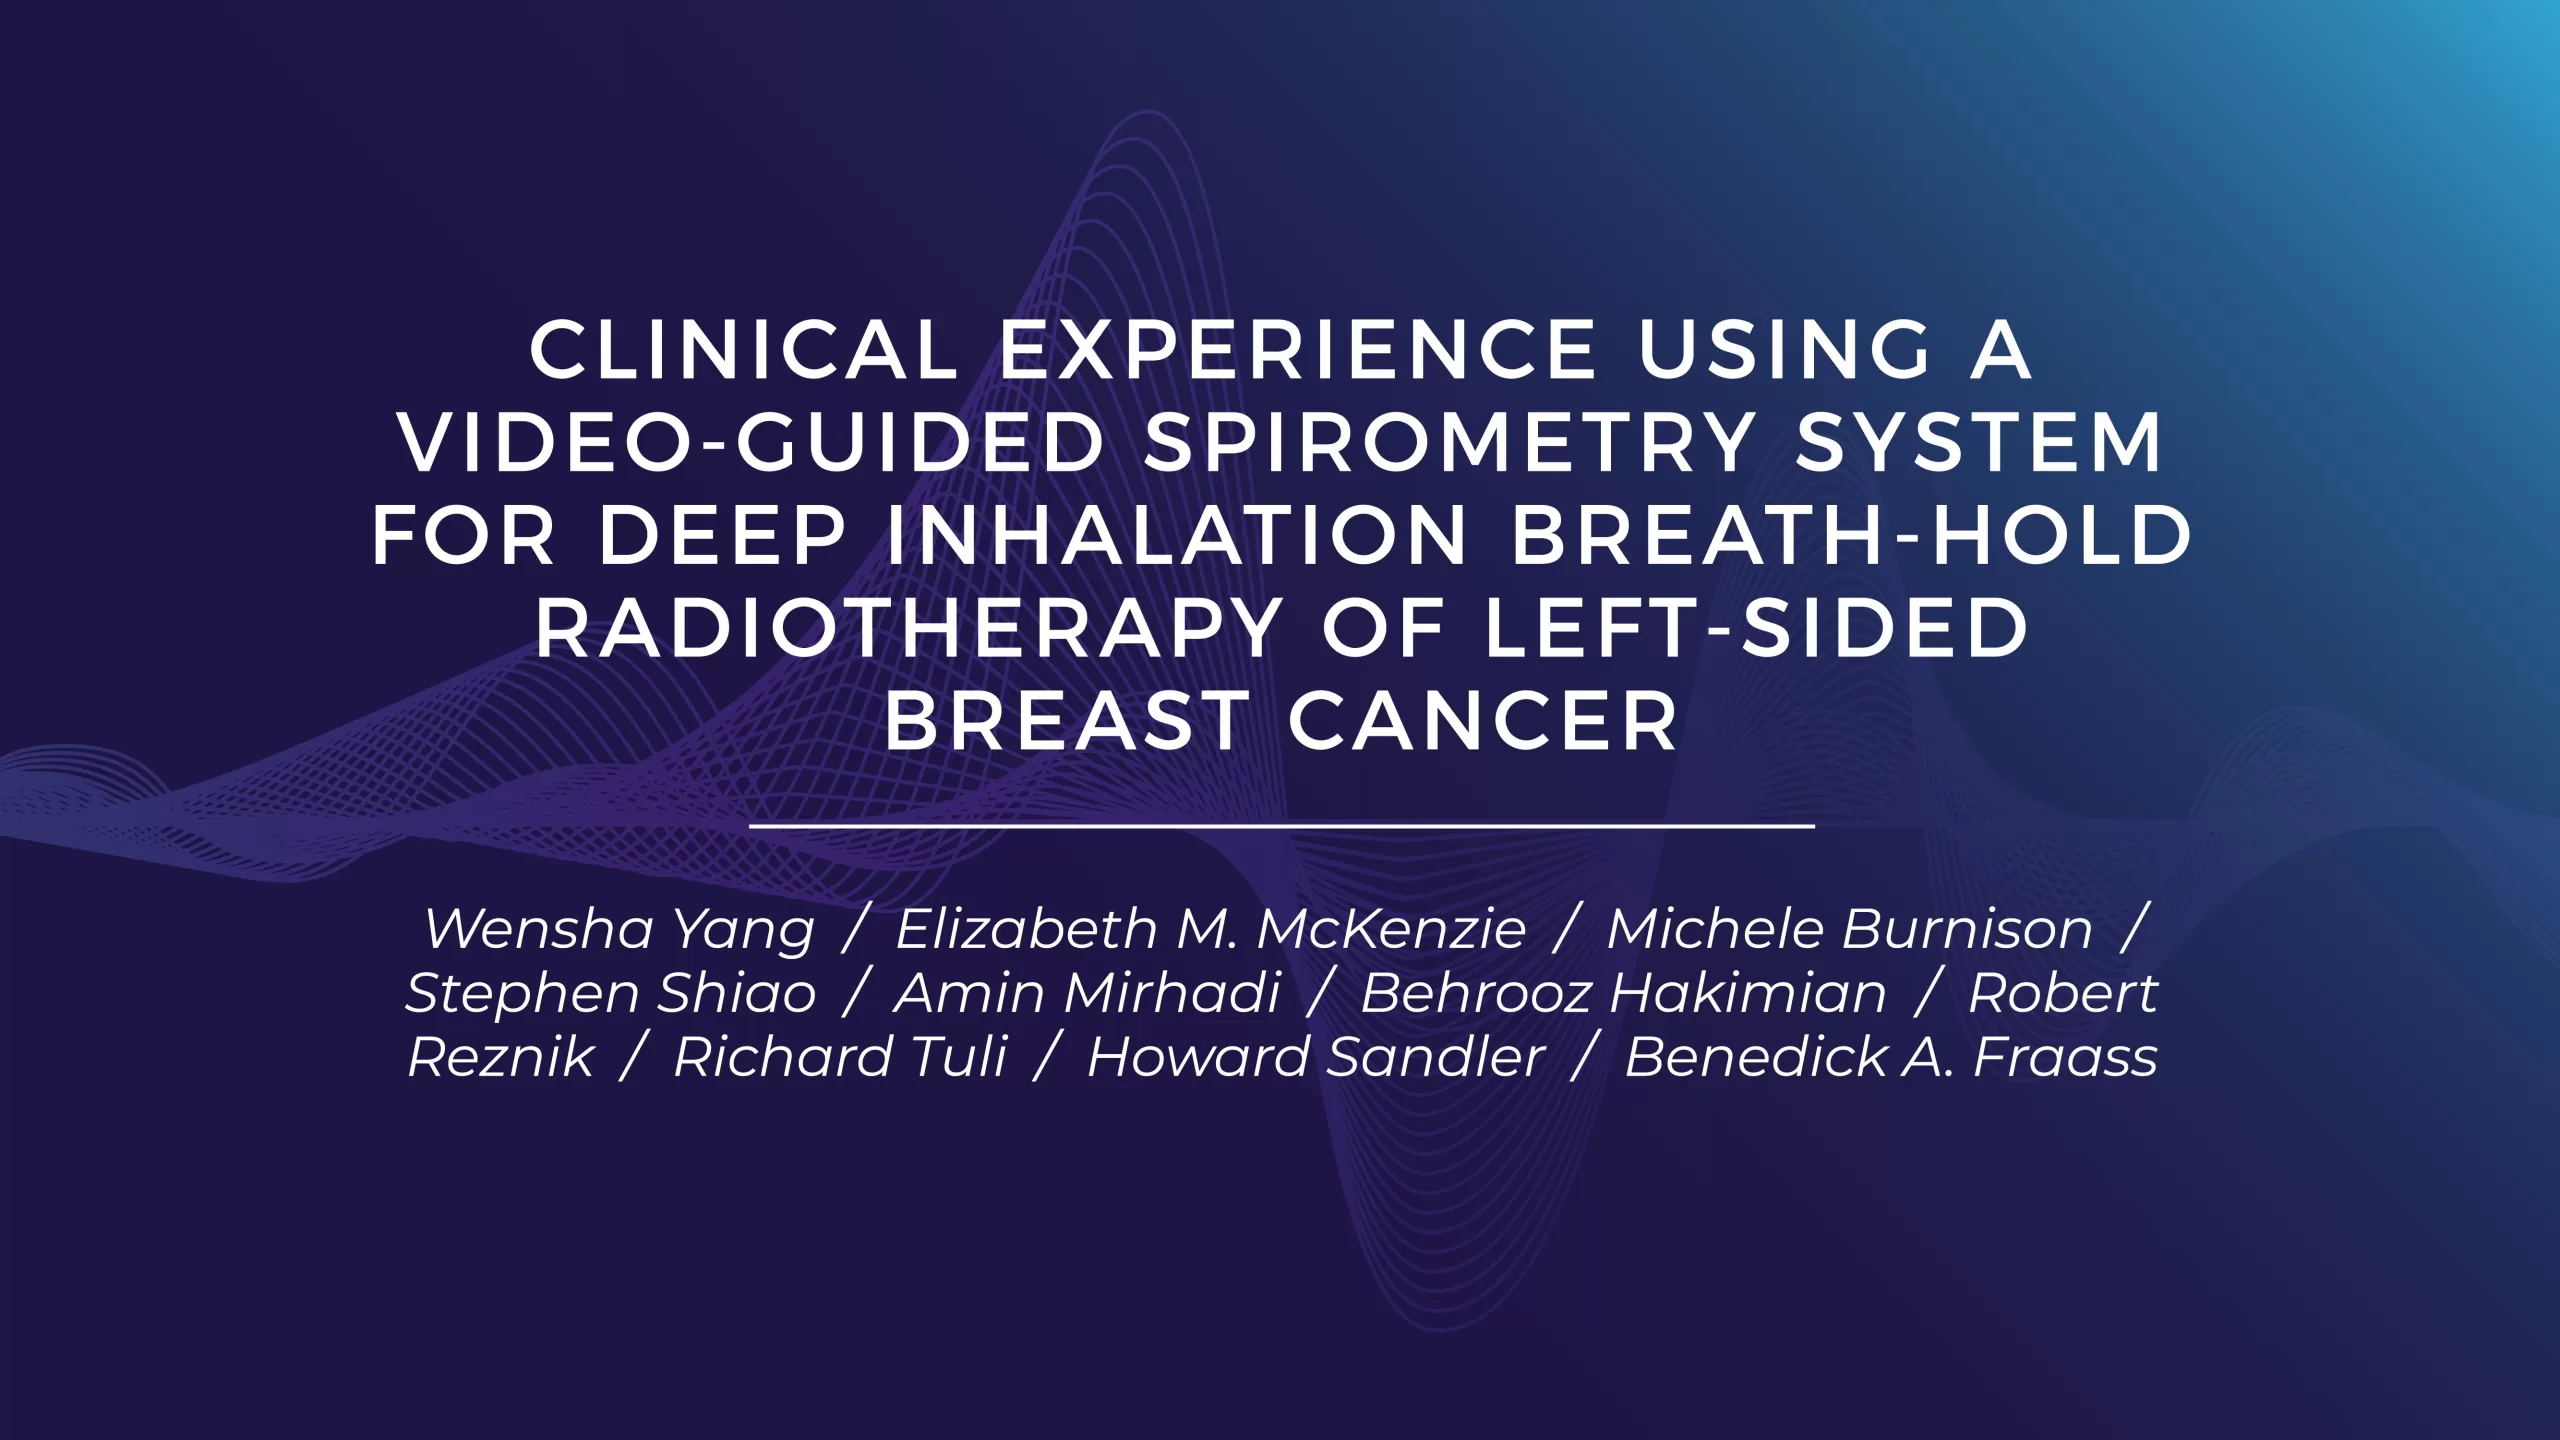 "Clinical Experience Using a Video-Guided Spirometry System for Deep Inhalation Breath-Hold Radiotherapy of Left-Sided Breast Cancer"